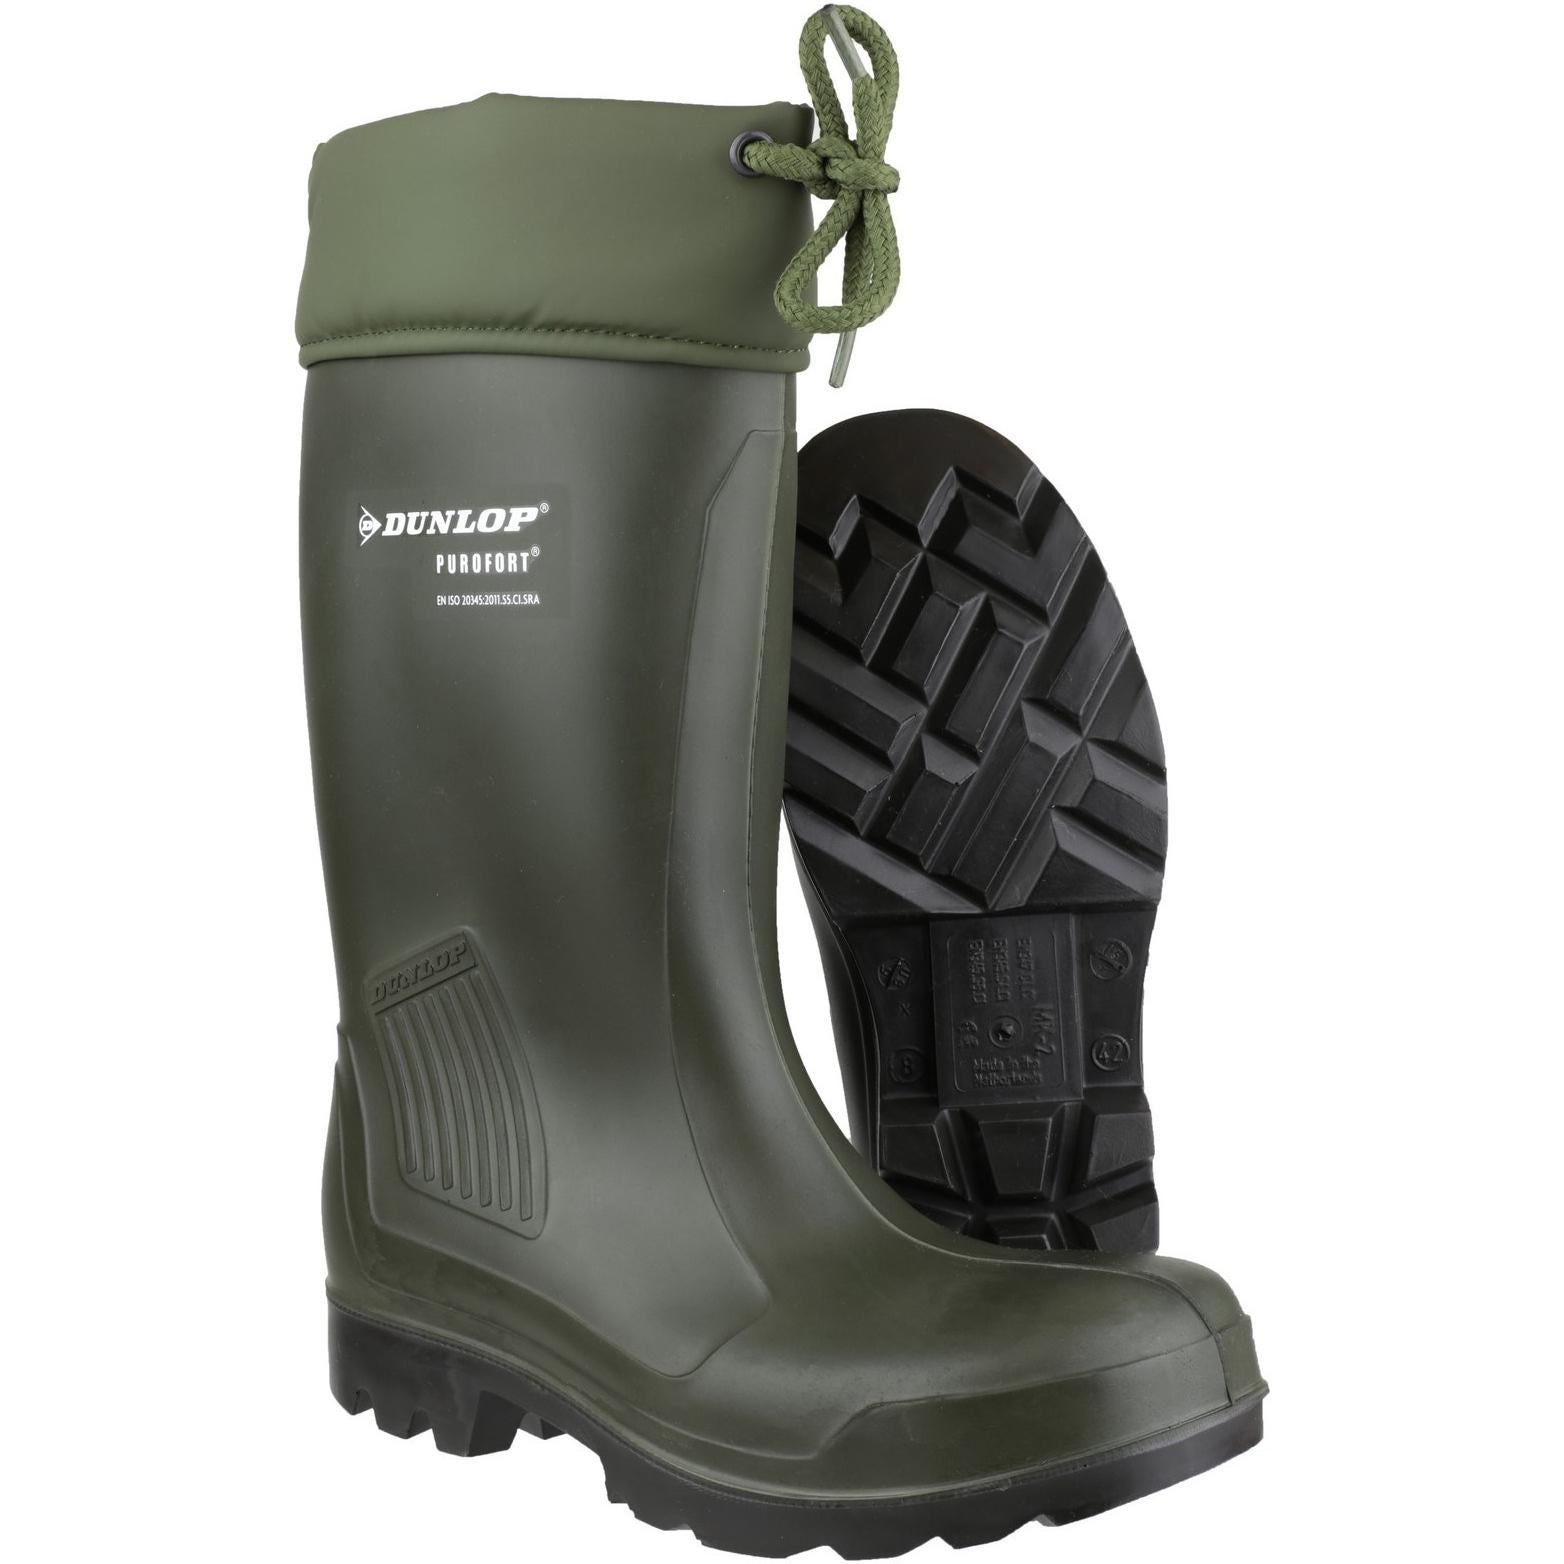 Dunlop Thermoflex Full Safety Boots